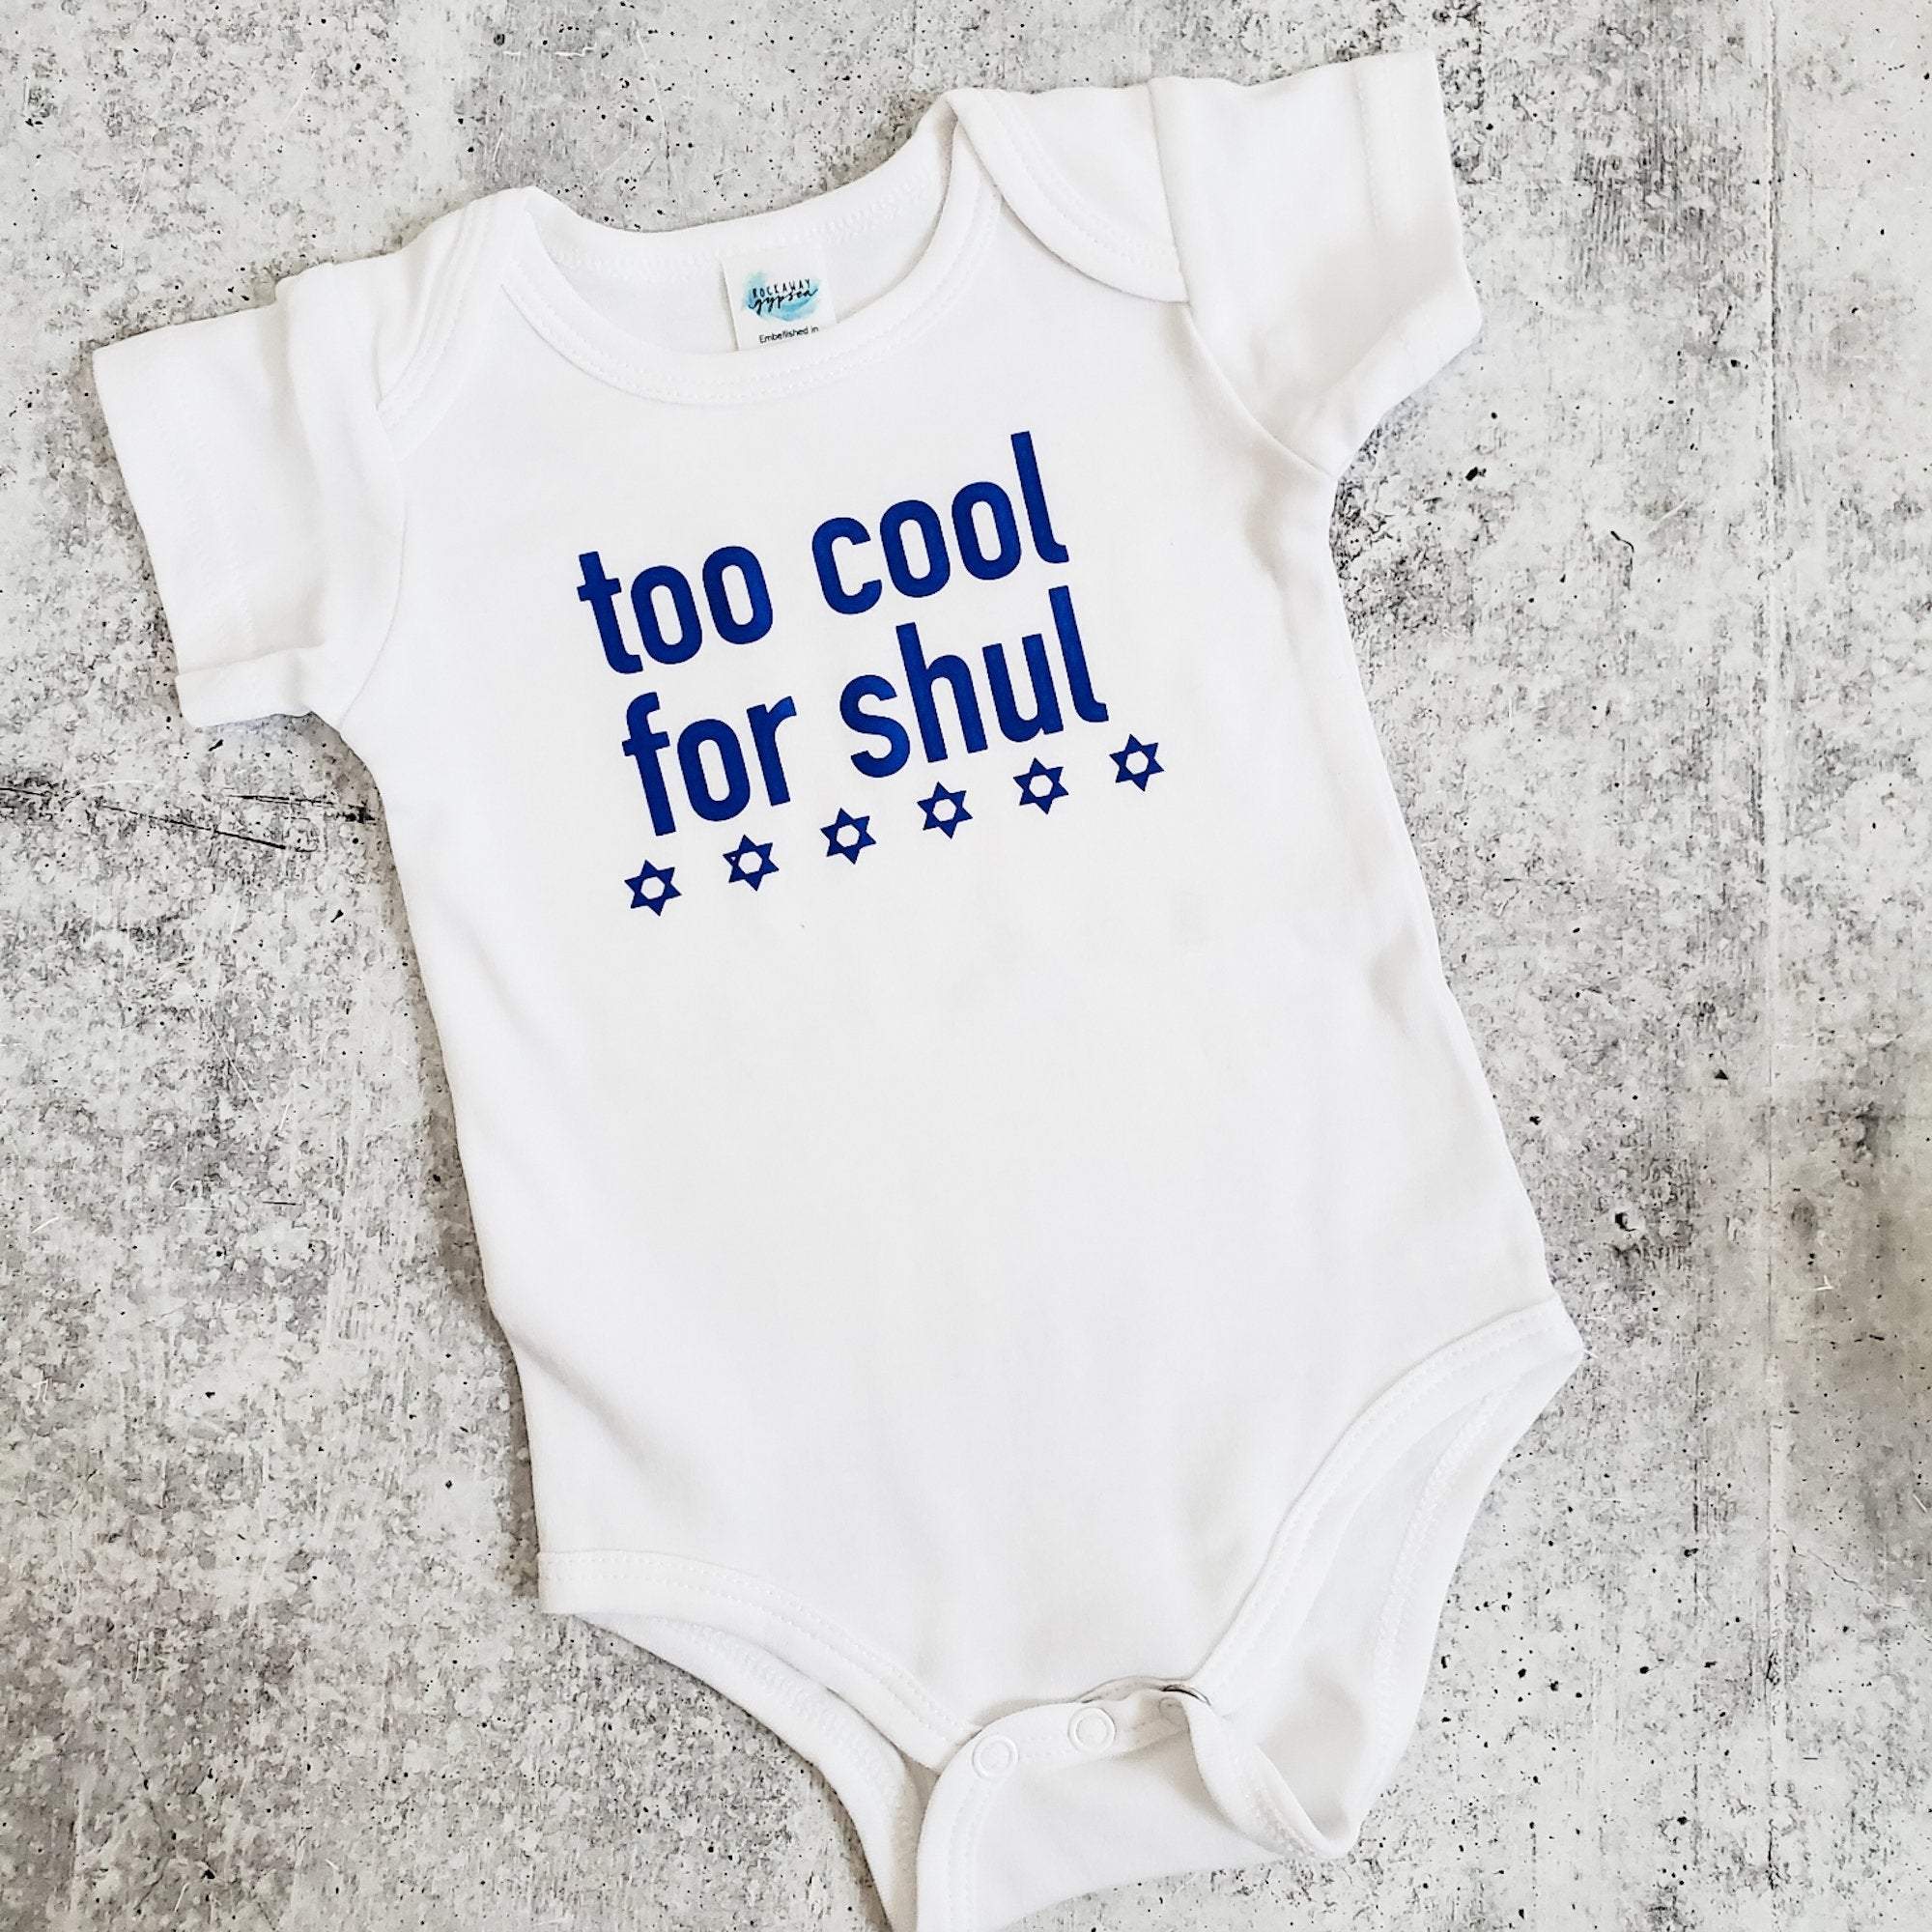 Too Cool for Shul Baby Bodysuit or Toddler Tee Shirt Salt and Sparkle